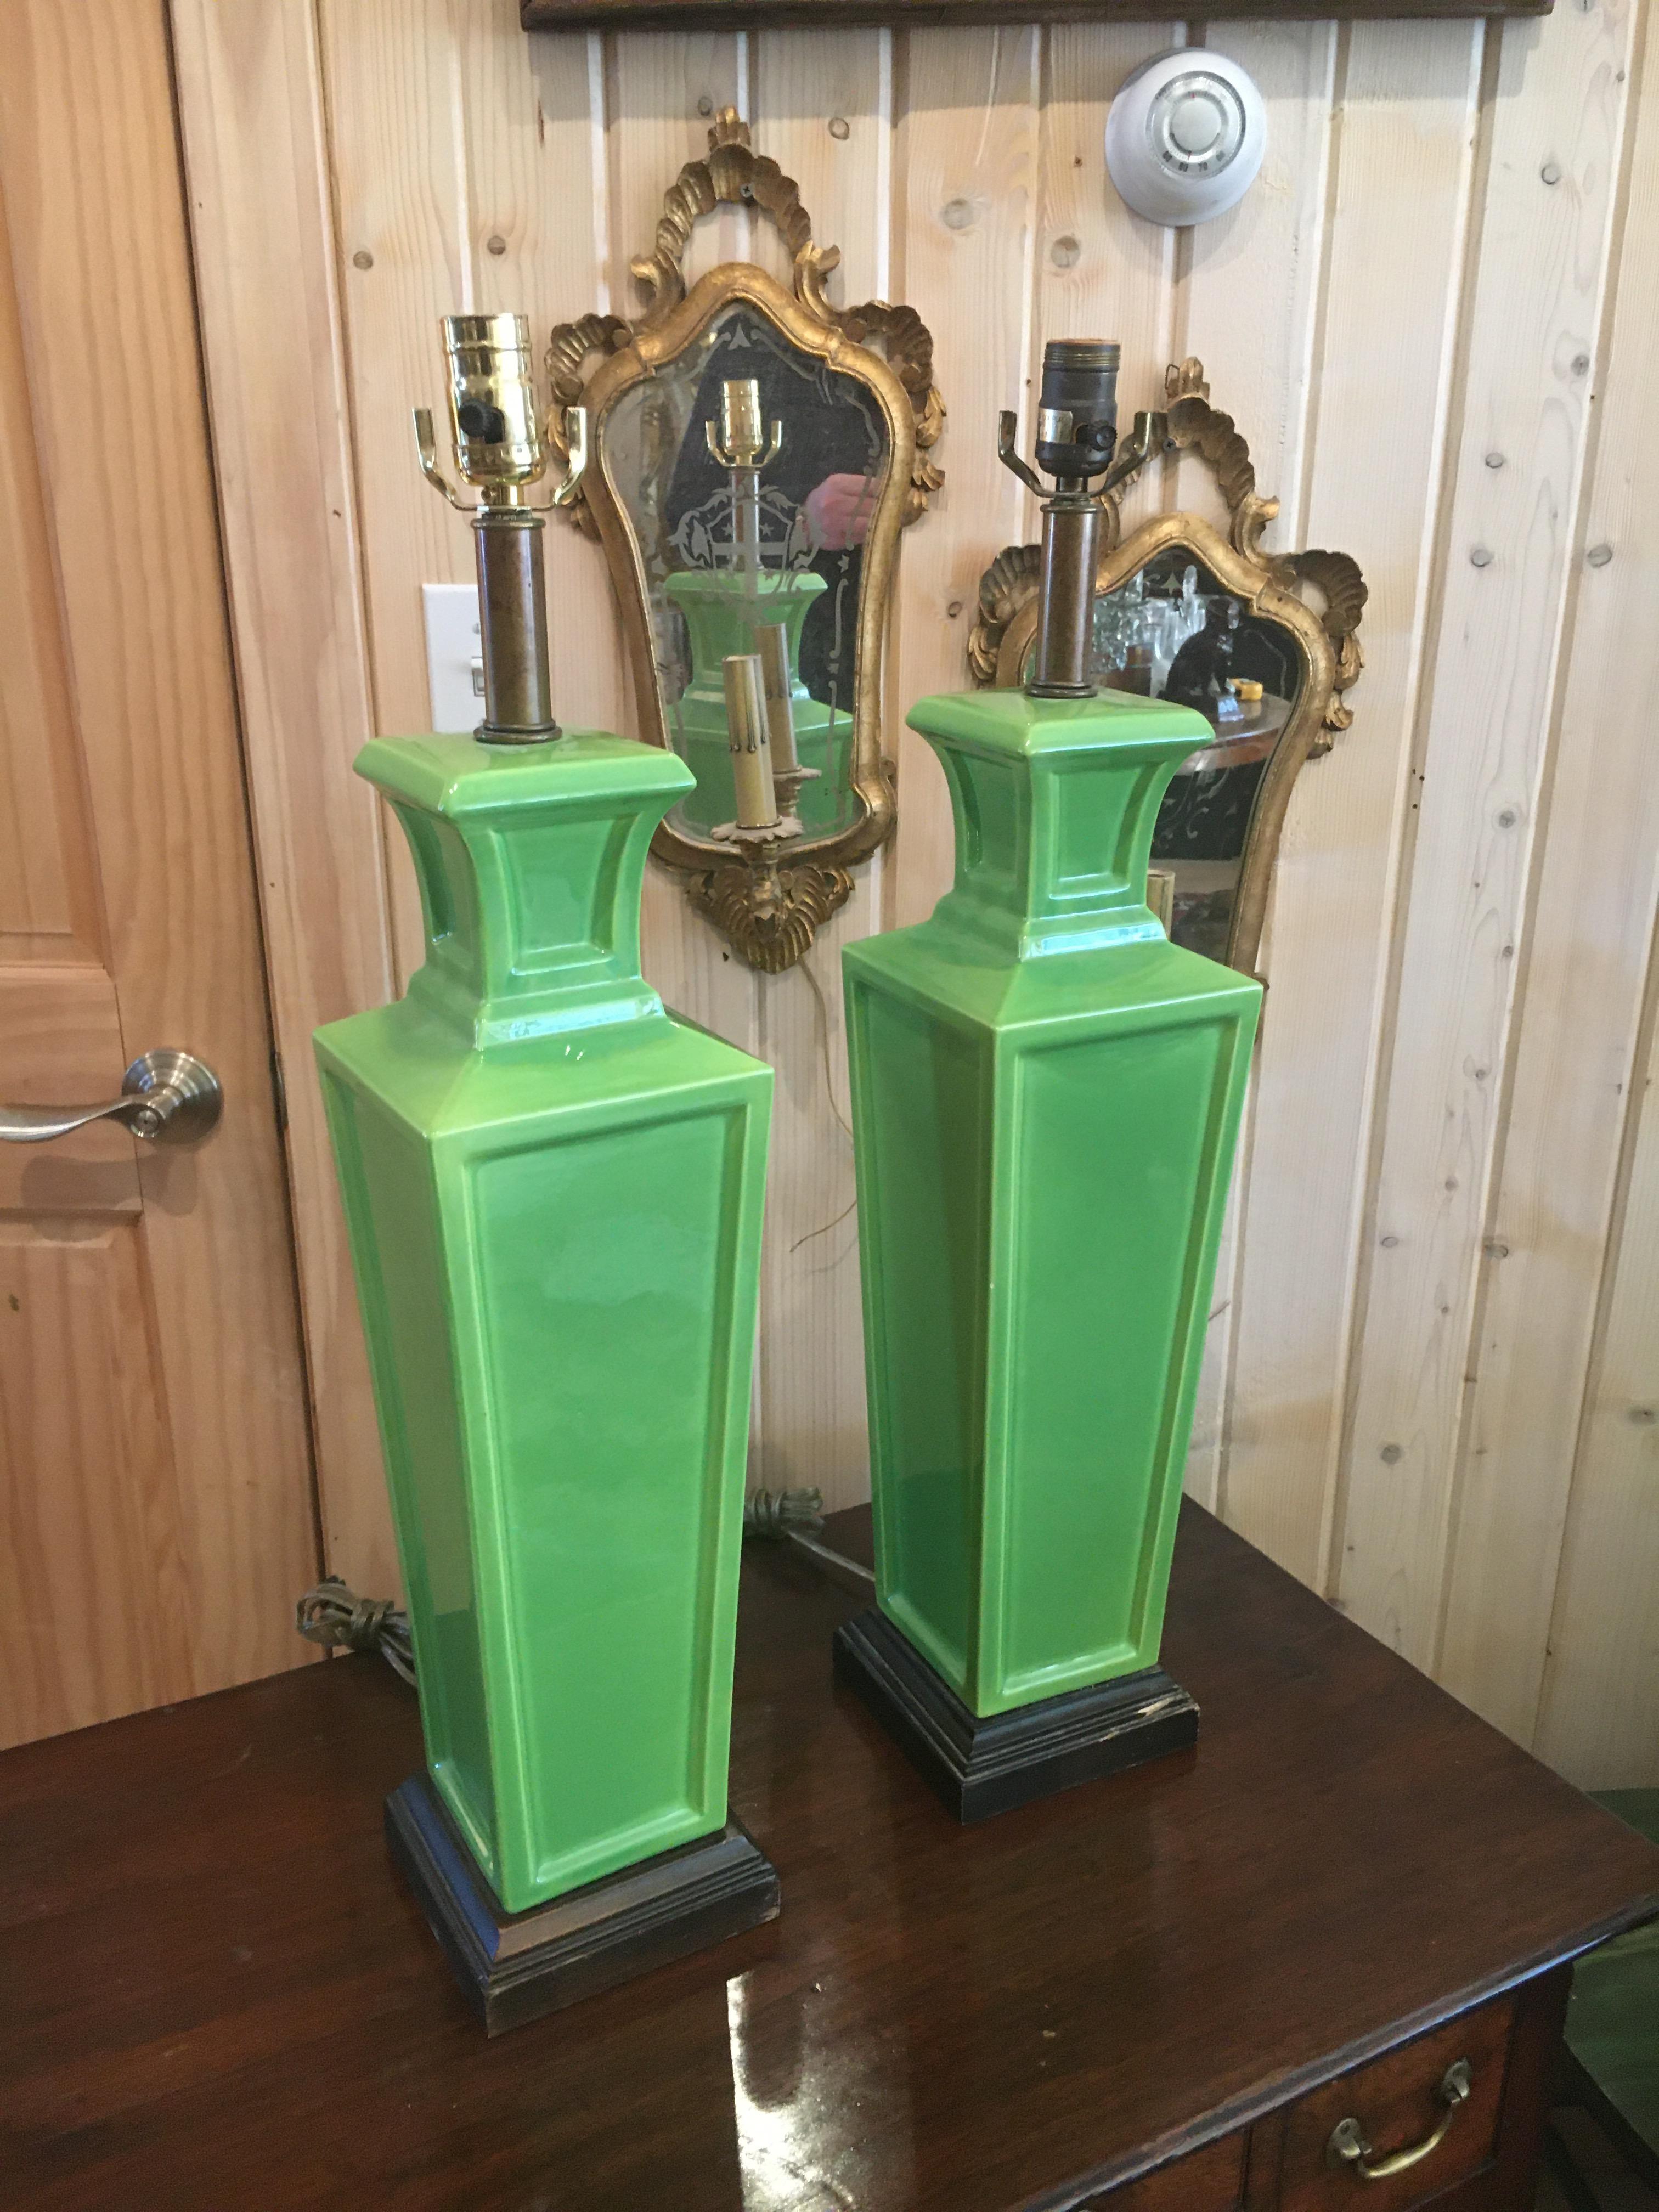 Two pairs of Frederick Cooper ceramic table lamps, great apple green color on one pair and burnt umber on the other pair. Priced per pair. Measurement is for apple green pair.